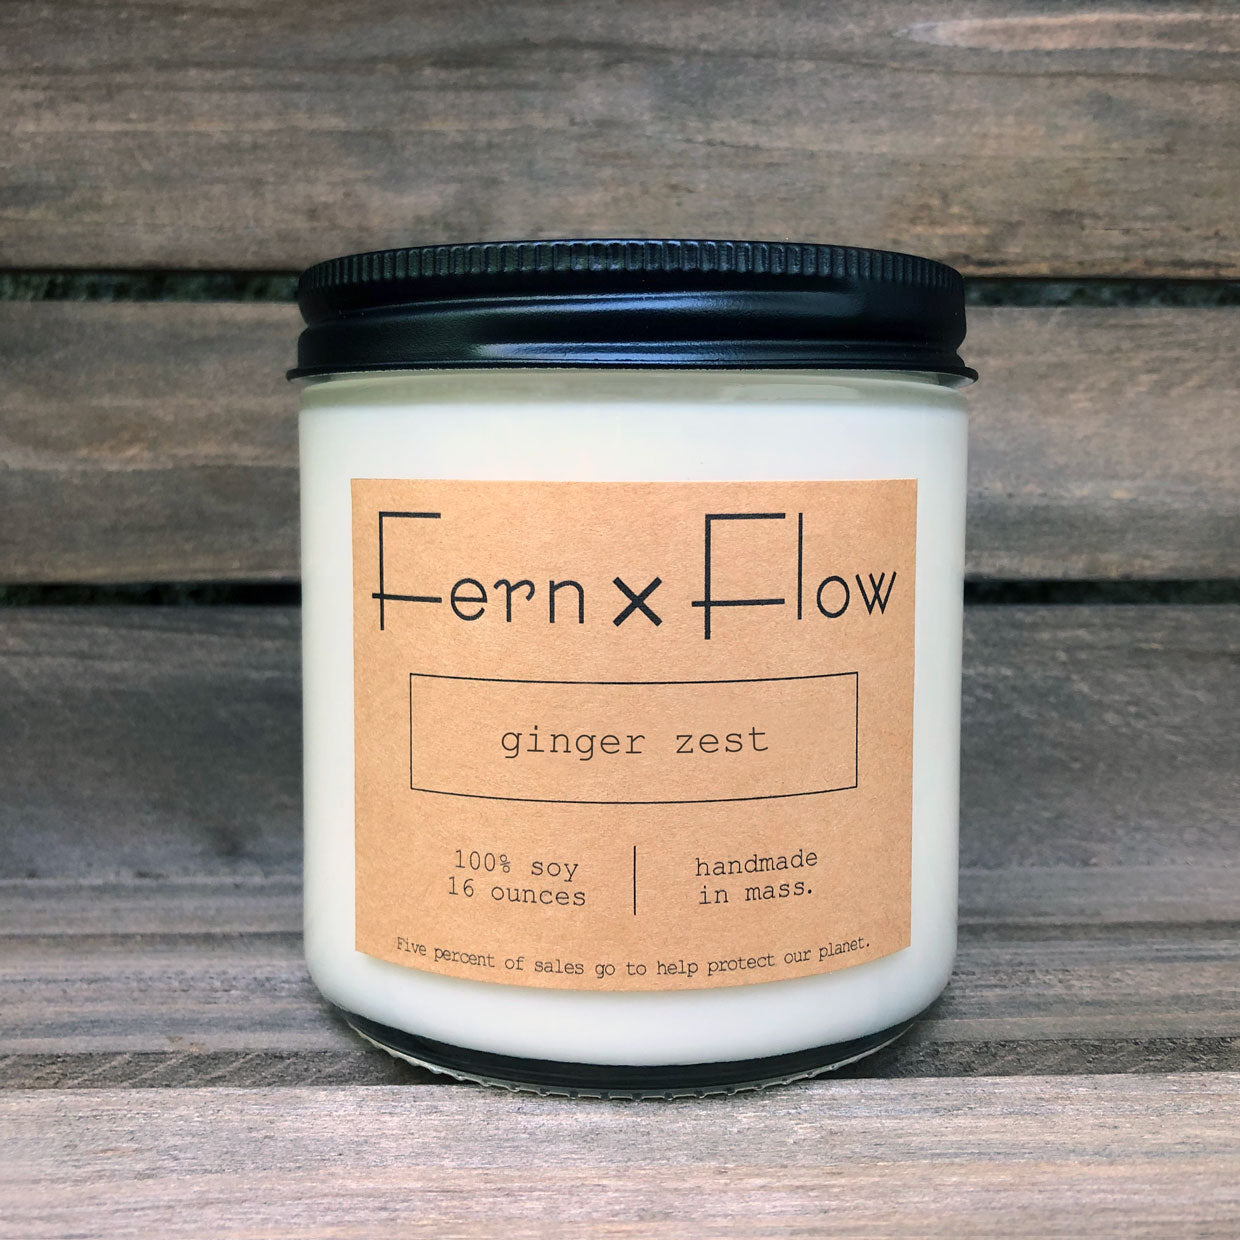 Sixteen-ounce Fern x Flow Ginger Zest scented soy candle against a weathered, wooden crate.